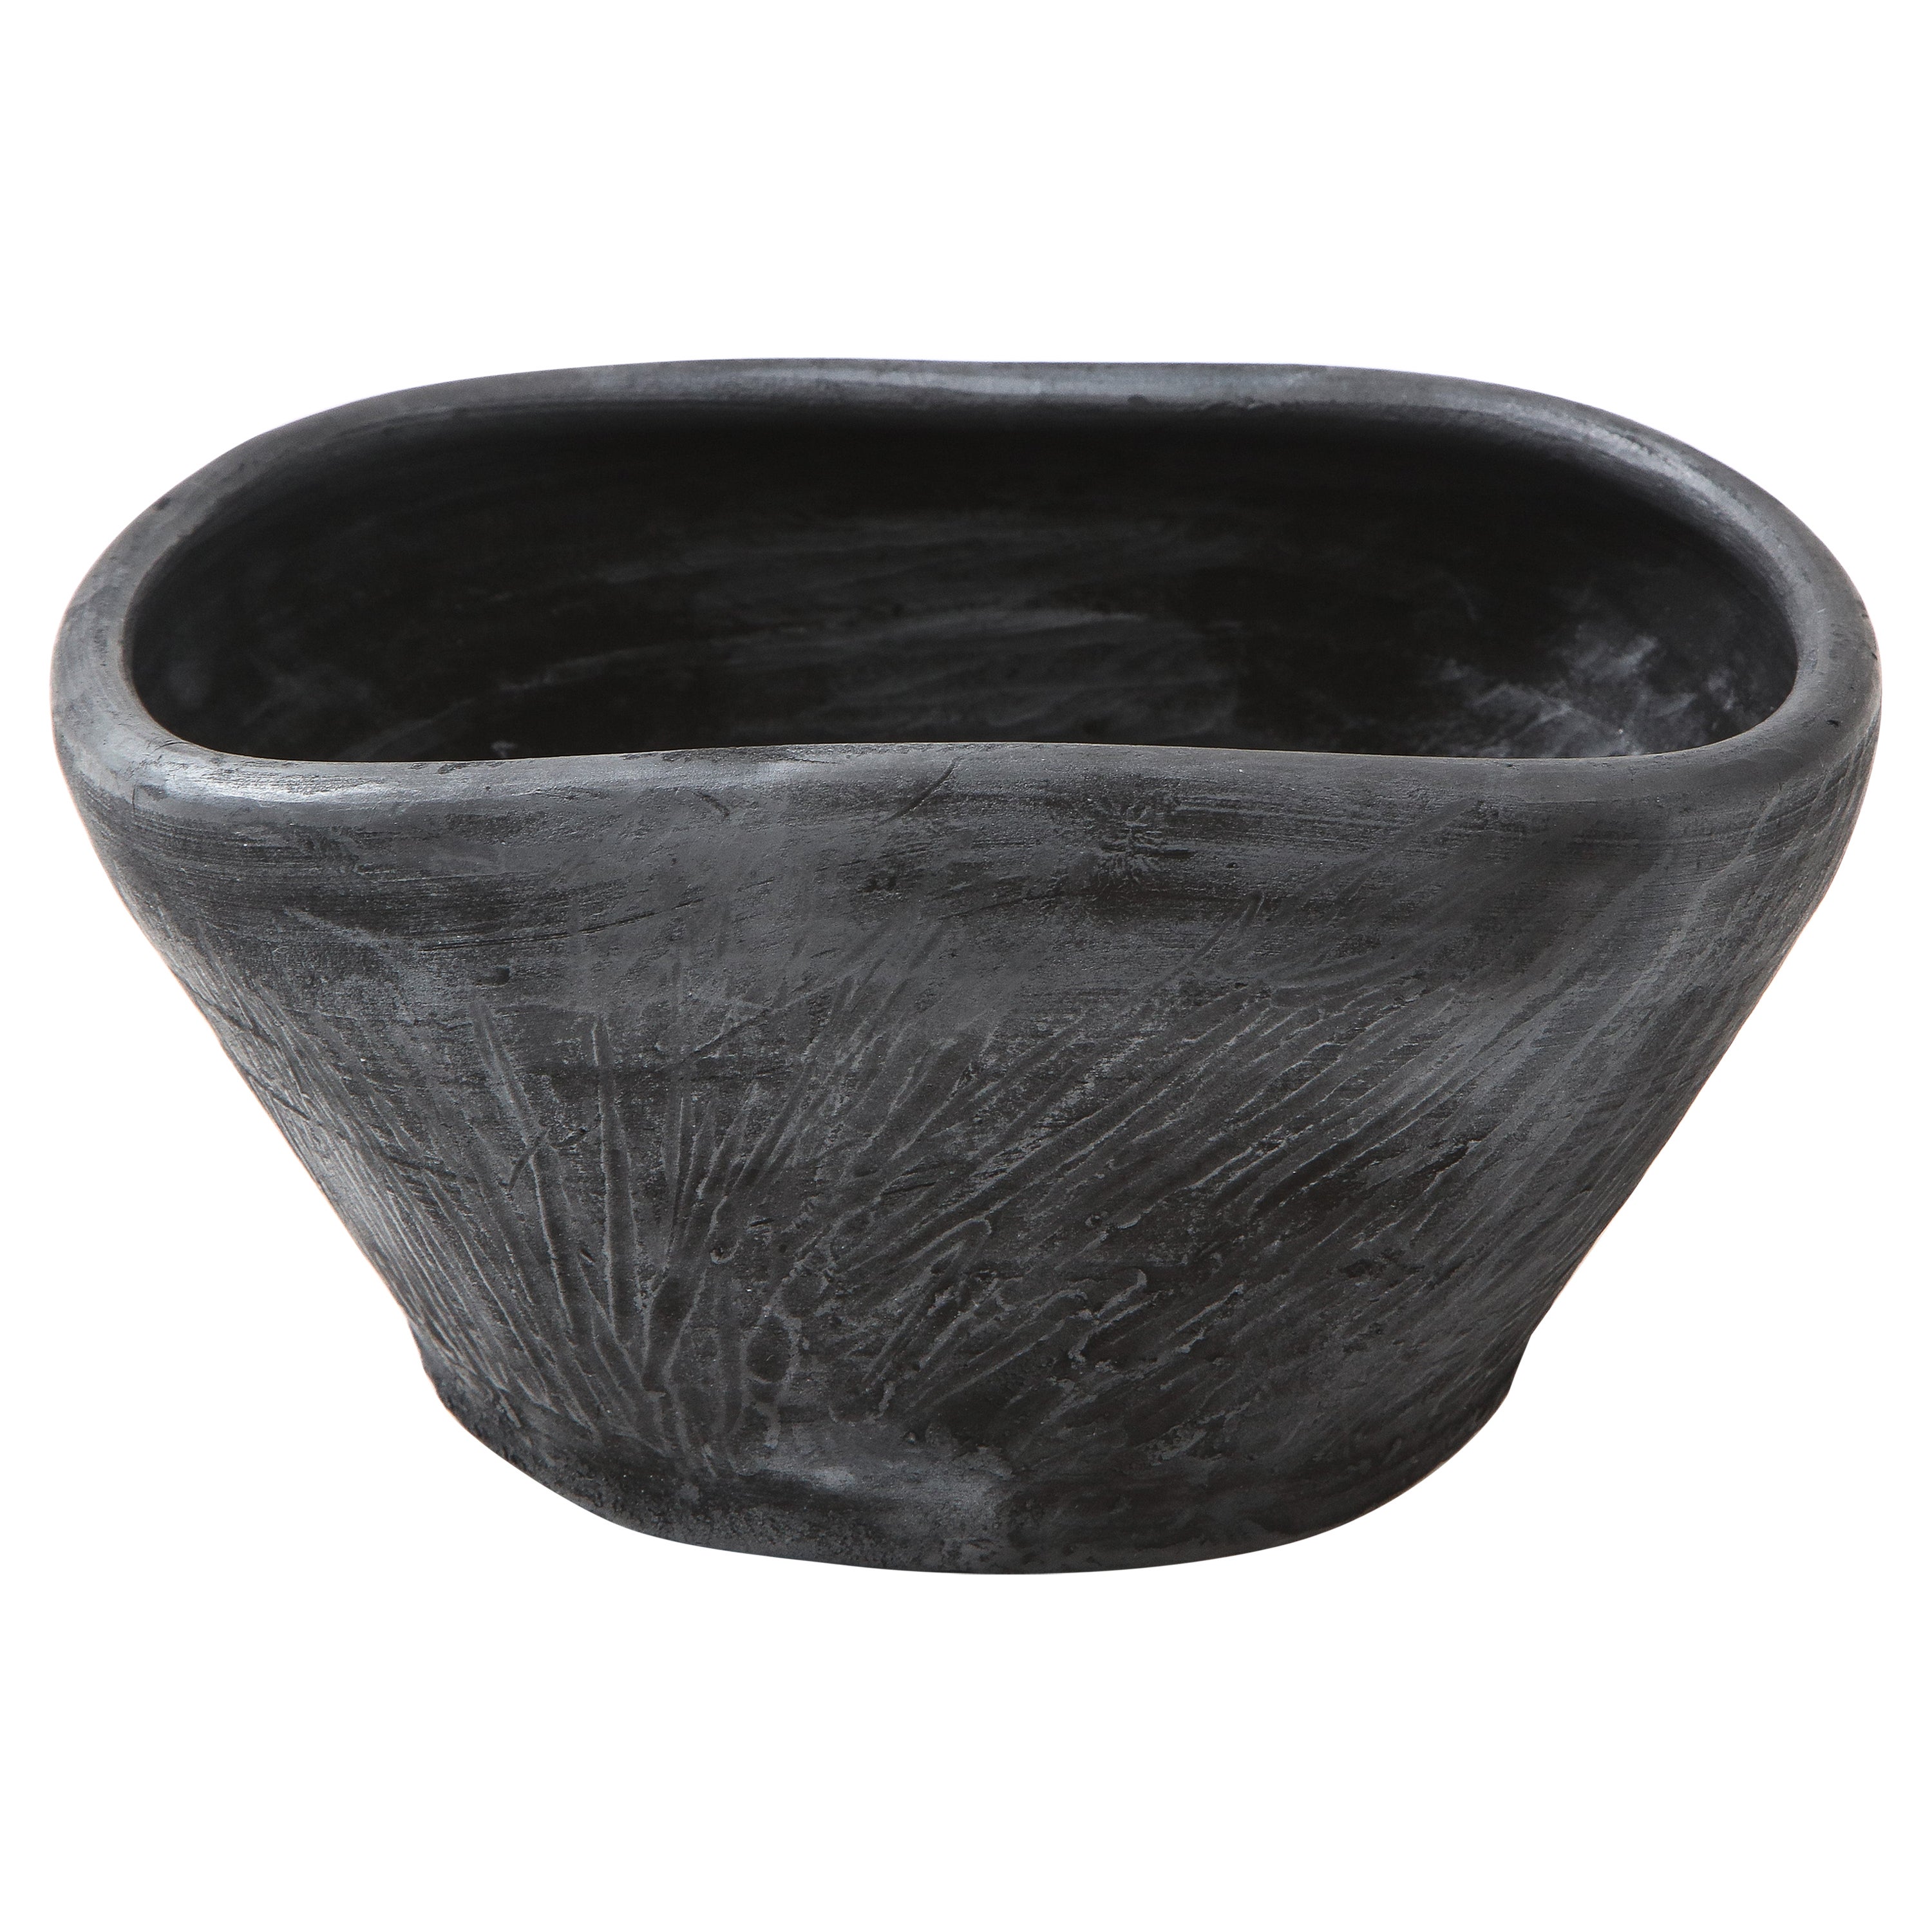 "Carbone" Charcoal and Silver Finish Terracotta Bowl by Facto Atelier Paris